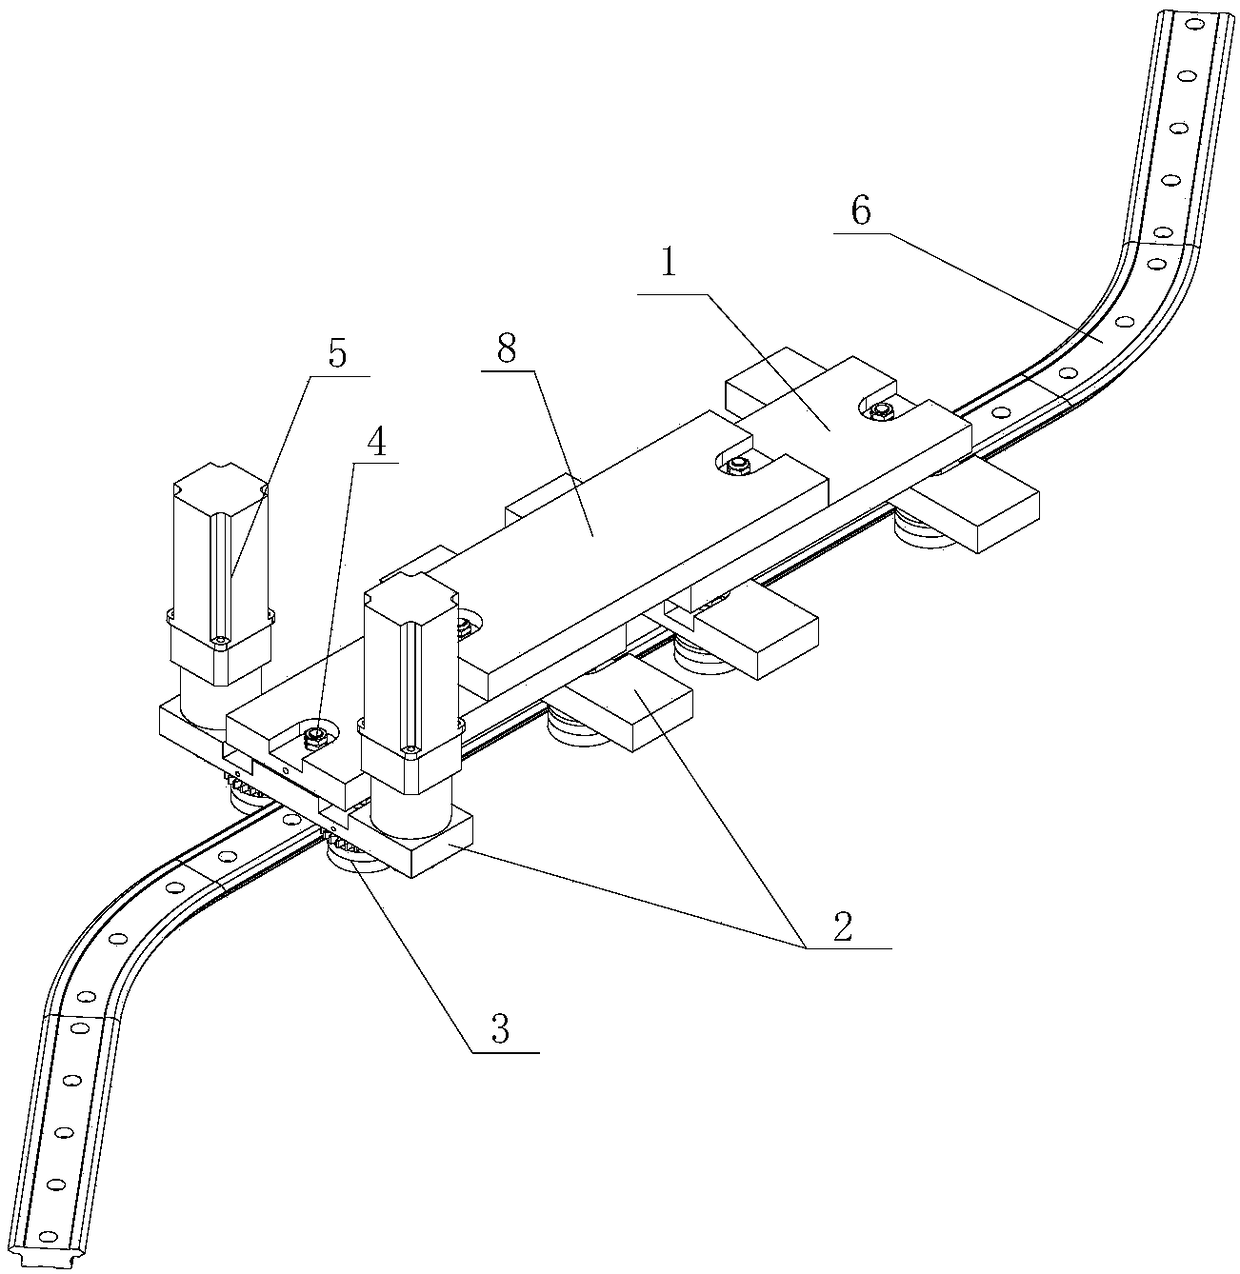 Self-driven guide rail trolley suitable for curve guide rail